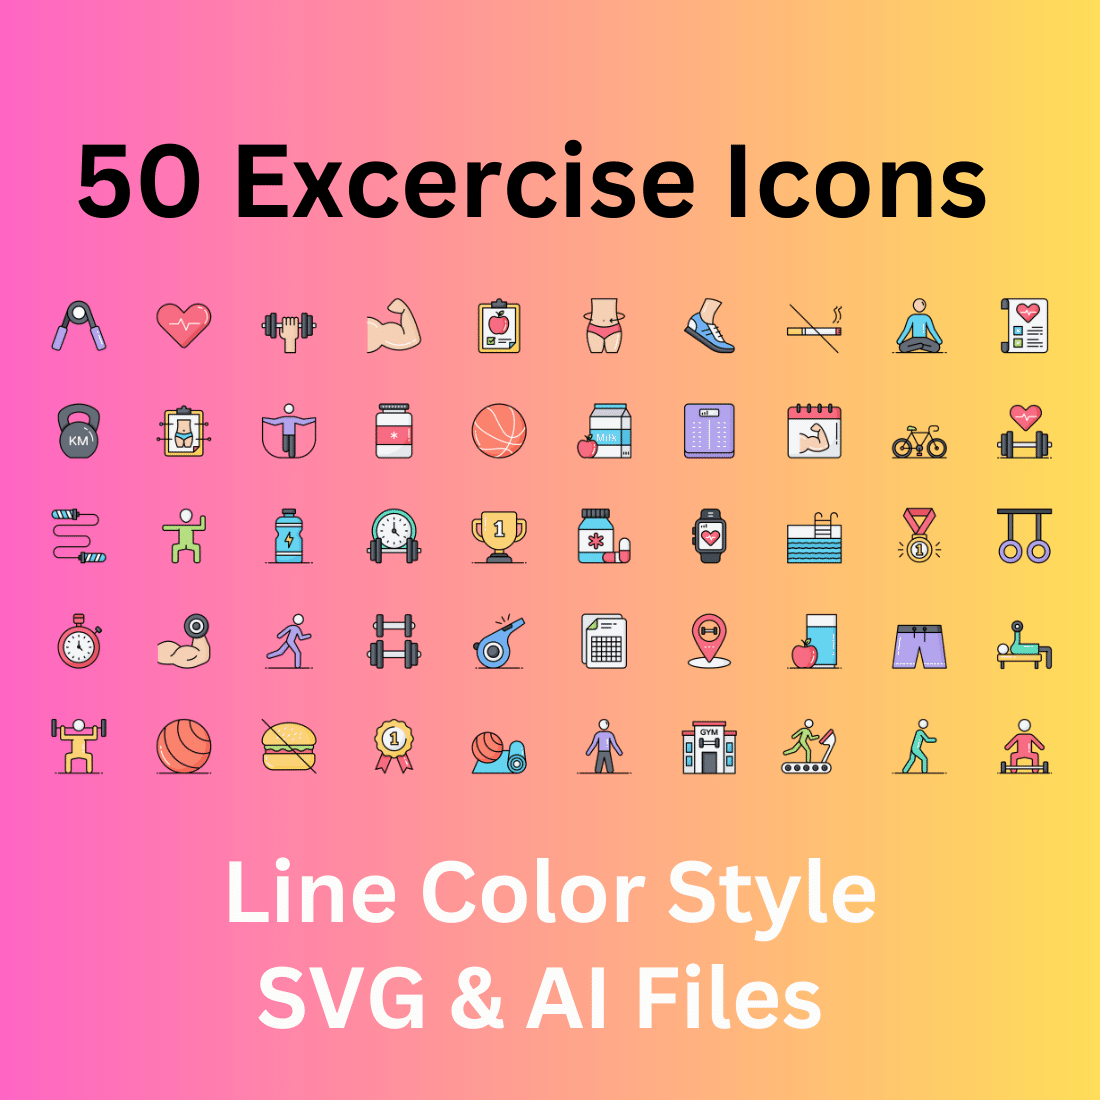 Exercise Icon Set 50 Line Color Icons - SVG And AI Files cover image.